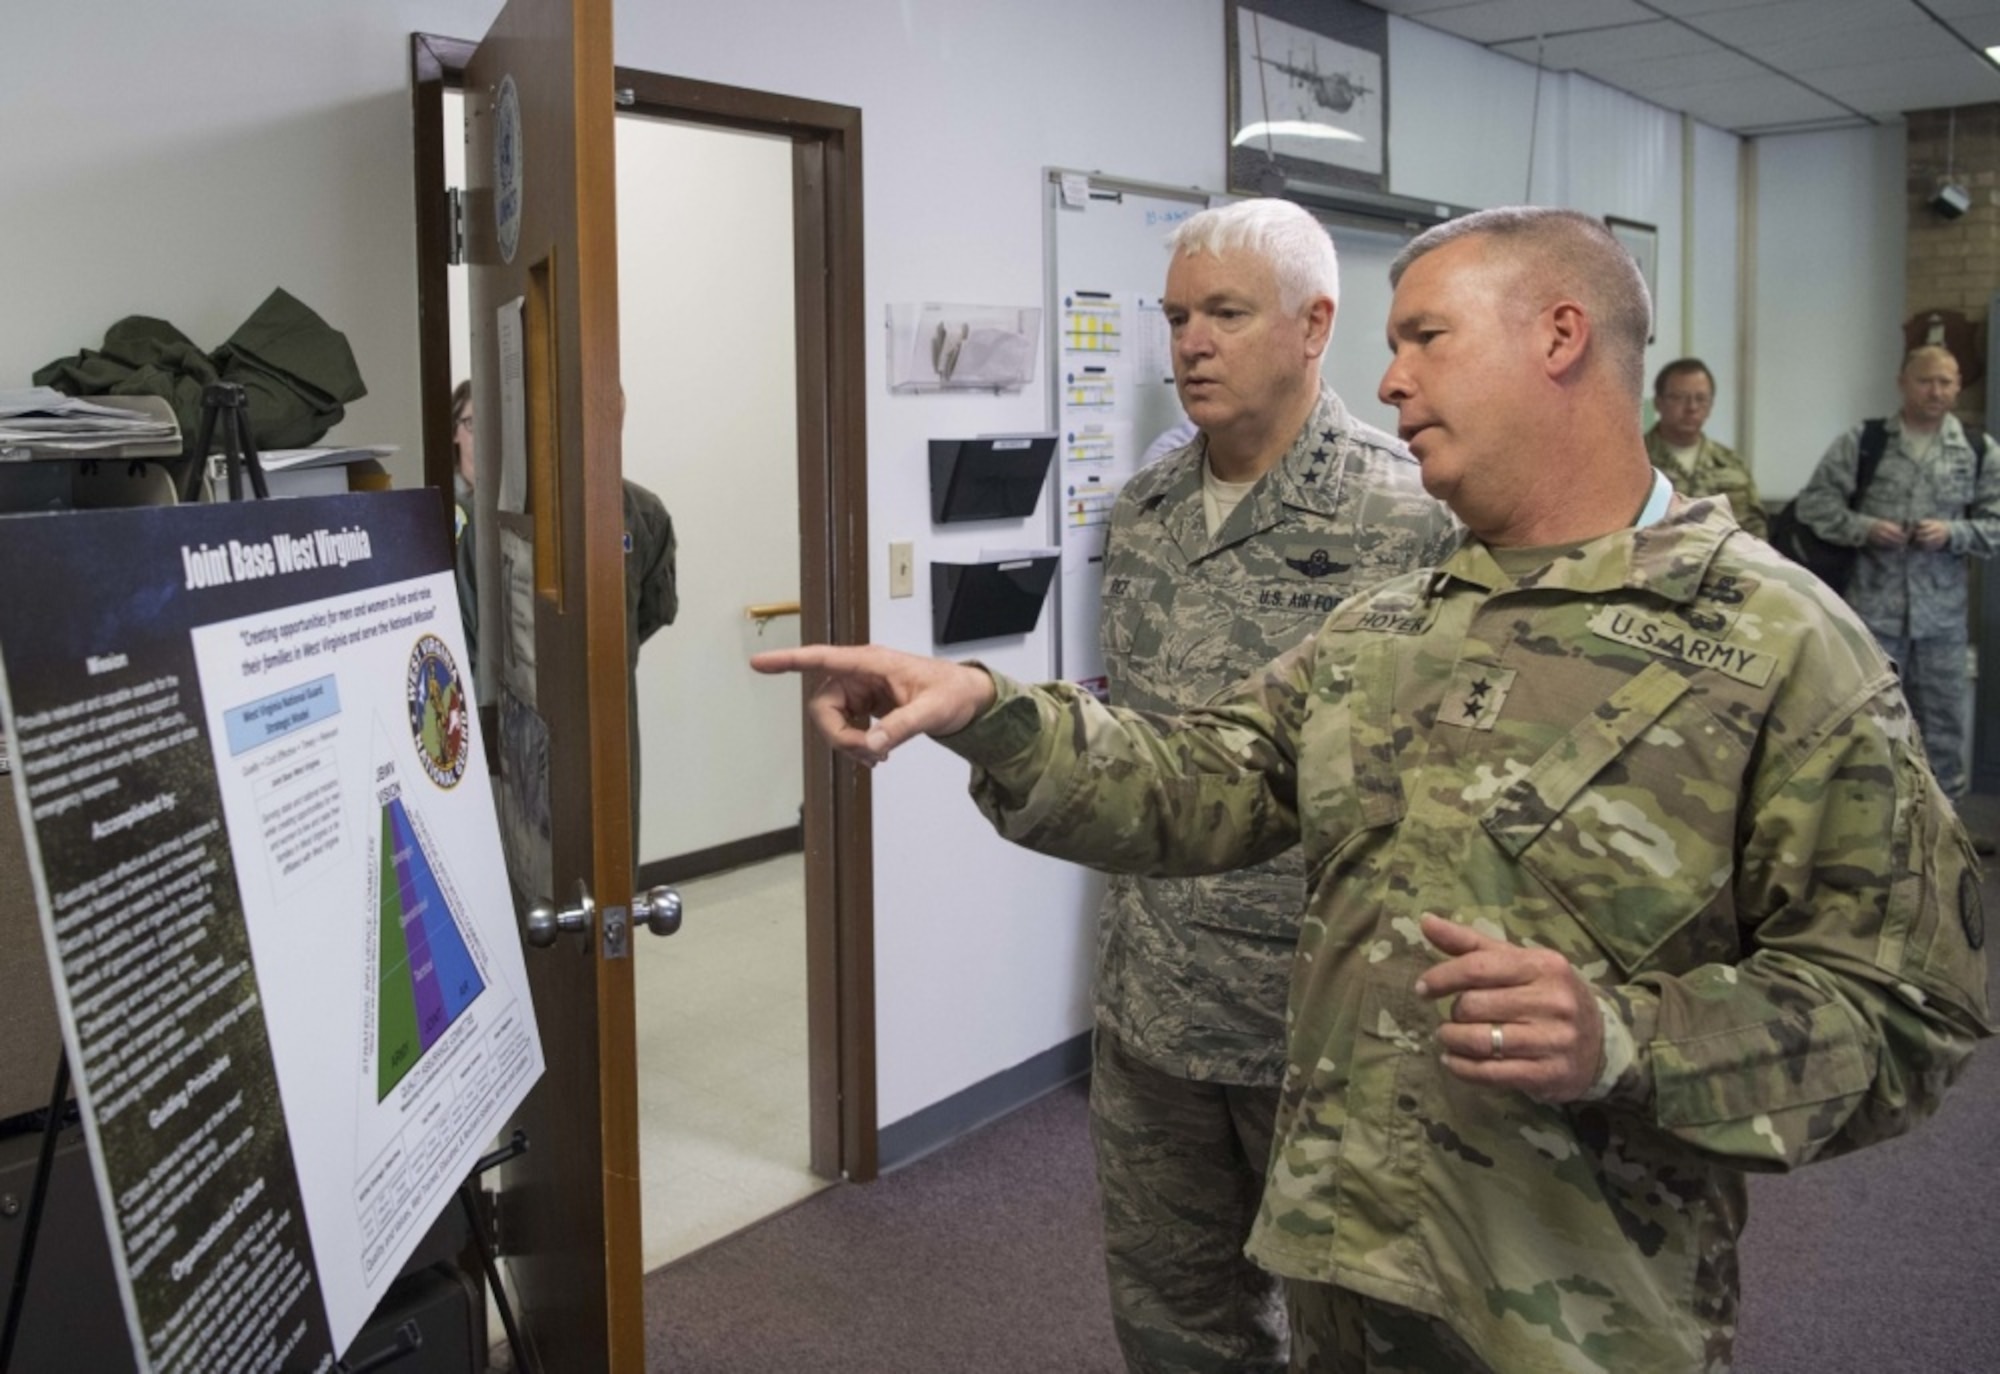 Maj. Gen. James A. Hoyer, the Adjutant General of the West Virginia National Guard, discusses the structure of Joint Base West Virginia with Director of the Air National Guard, Lt. Gen. L. Scott Rice, during a visit to McLaughlin Air National Guard Base July 26, 2017. Rice and Air National Guard Command Chief Master Sgt. Ronald Anderson gained insight into the 130th AW mission and recognized the accomplishments of some of the unit’s outstanding Airmen through a coining ceremony. (U.S. Air National Guard photo by Tech. Sgt. De-Juan Haley) 